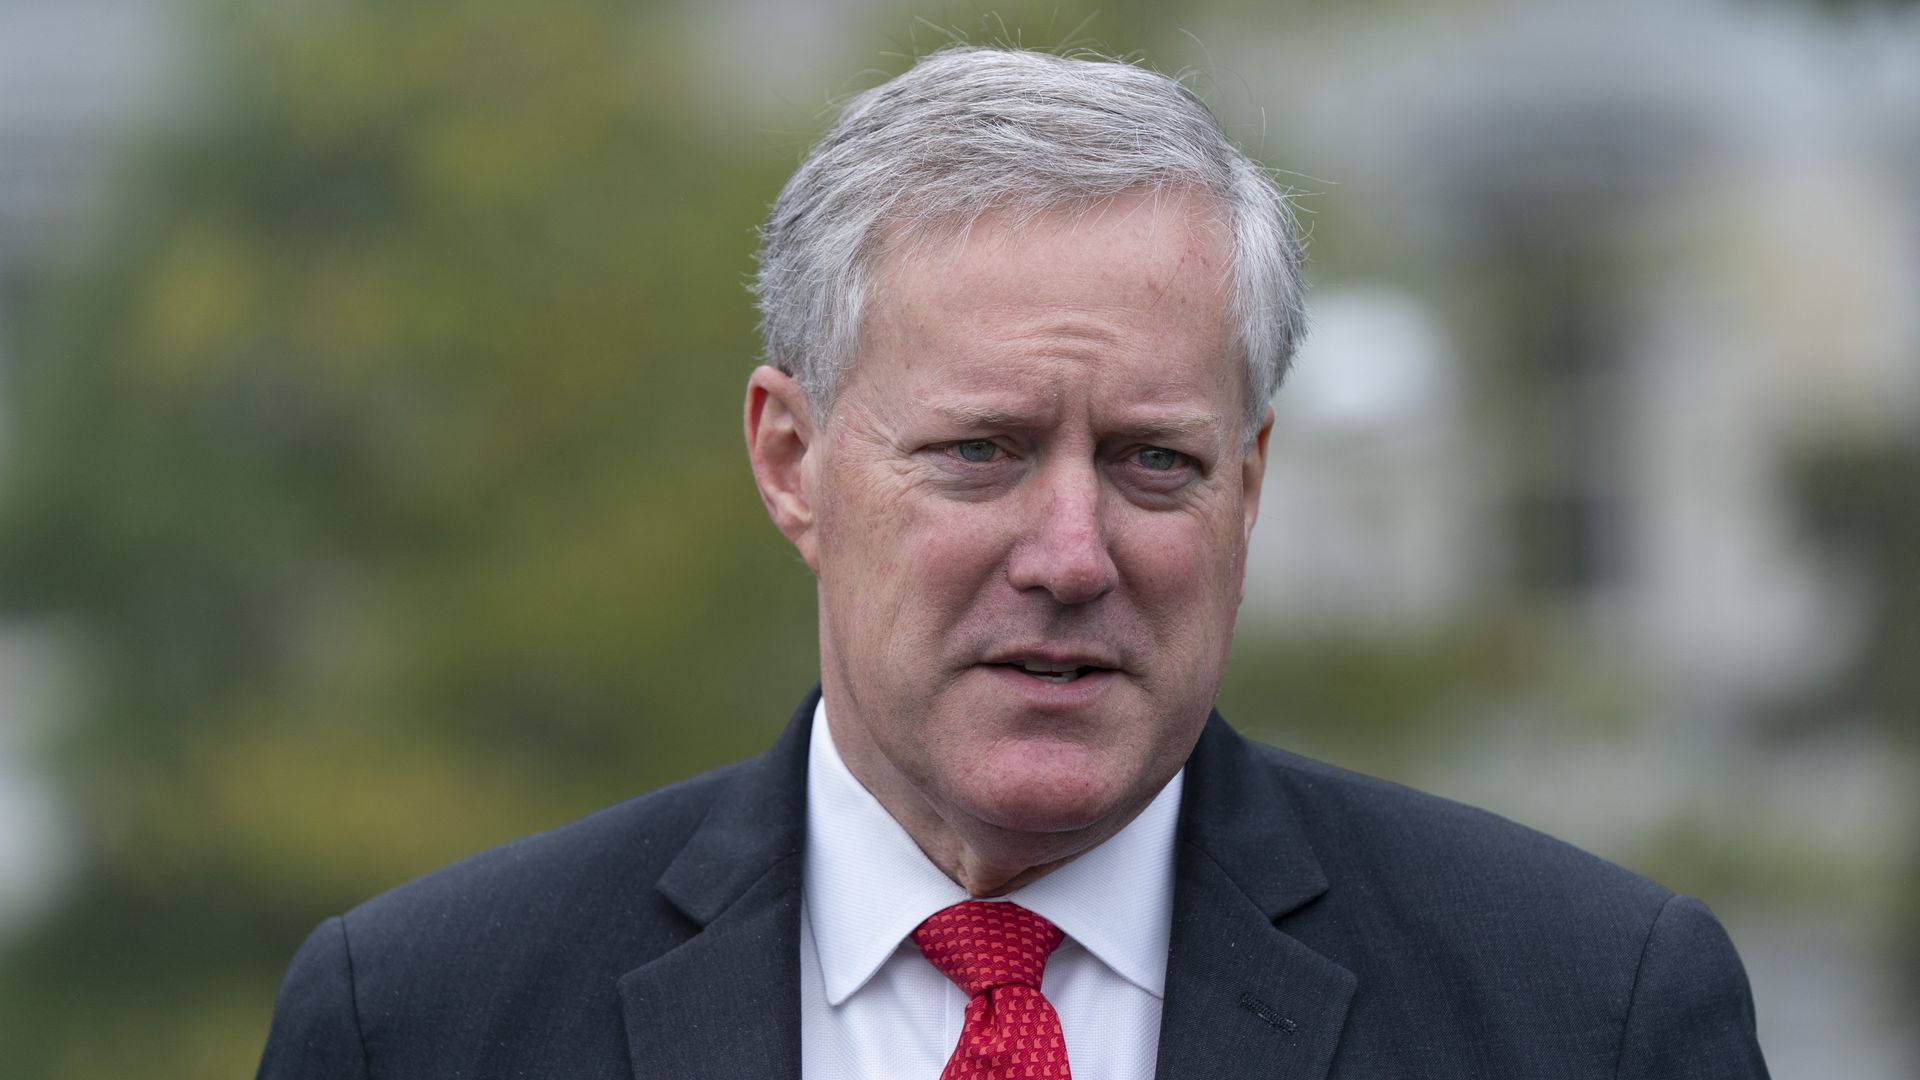 Mark Meadows, then White House chief of staff, speaks to members of the media outside of the White House in Washington, D.C., U.S., on Wednesday, Oct. 21, 2020. 